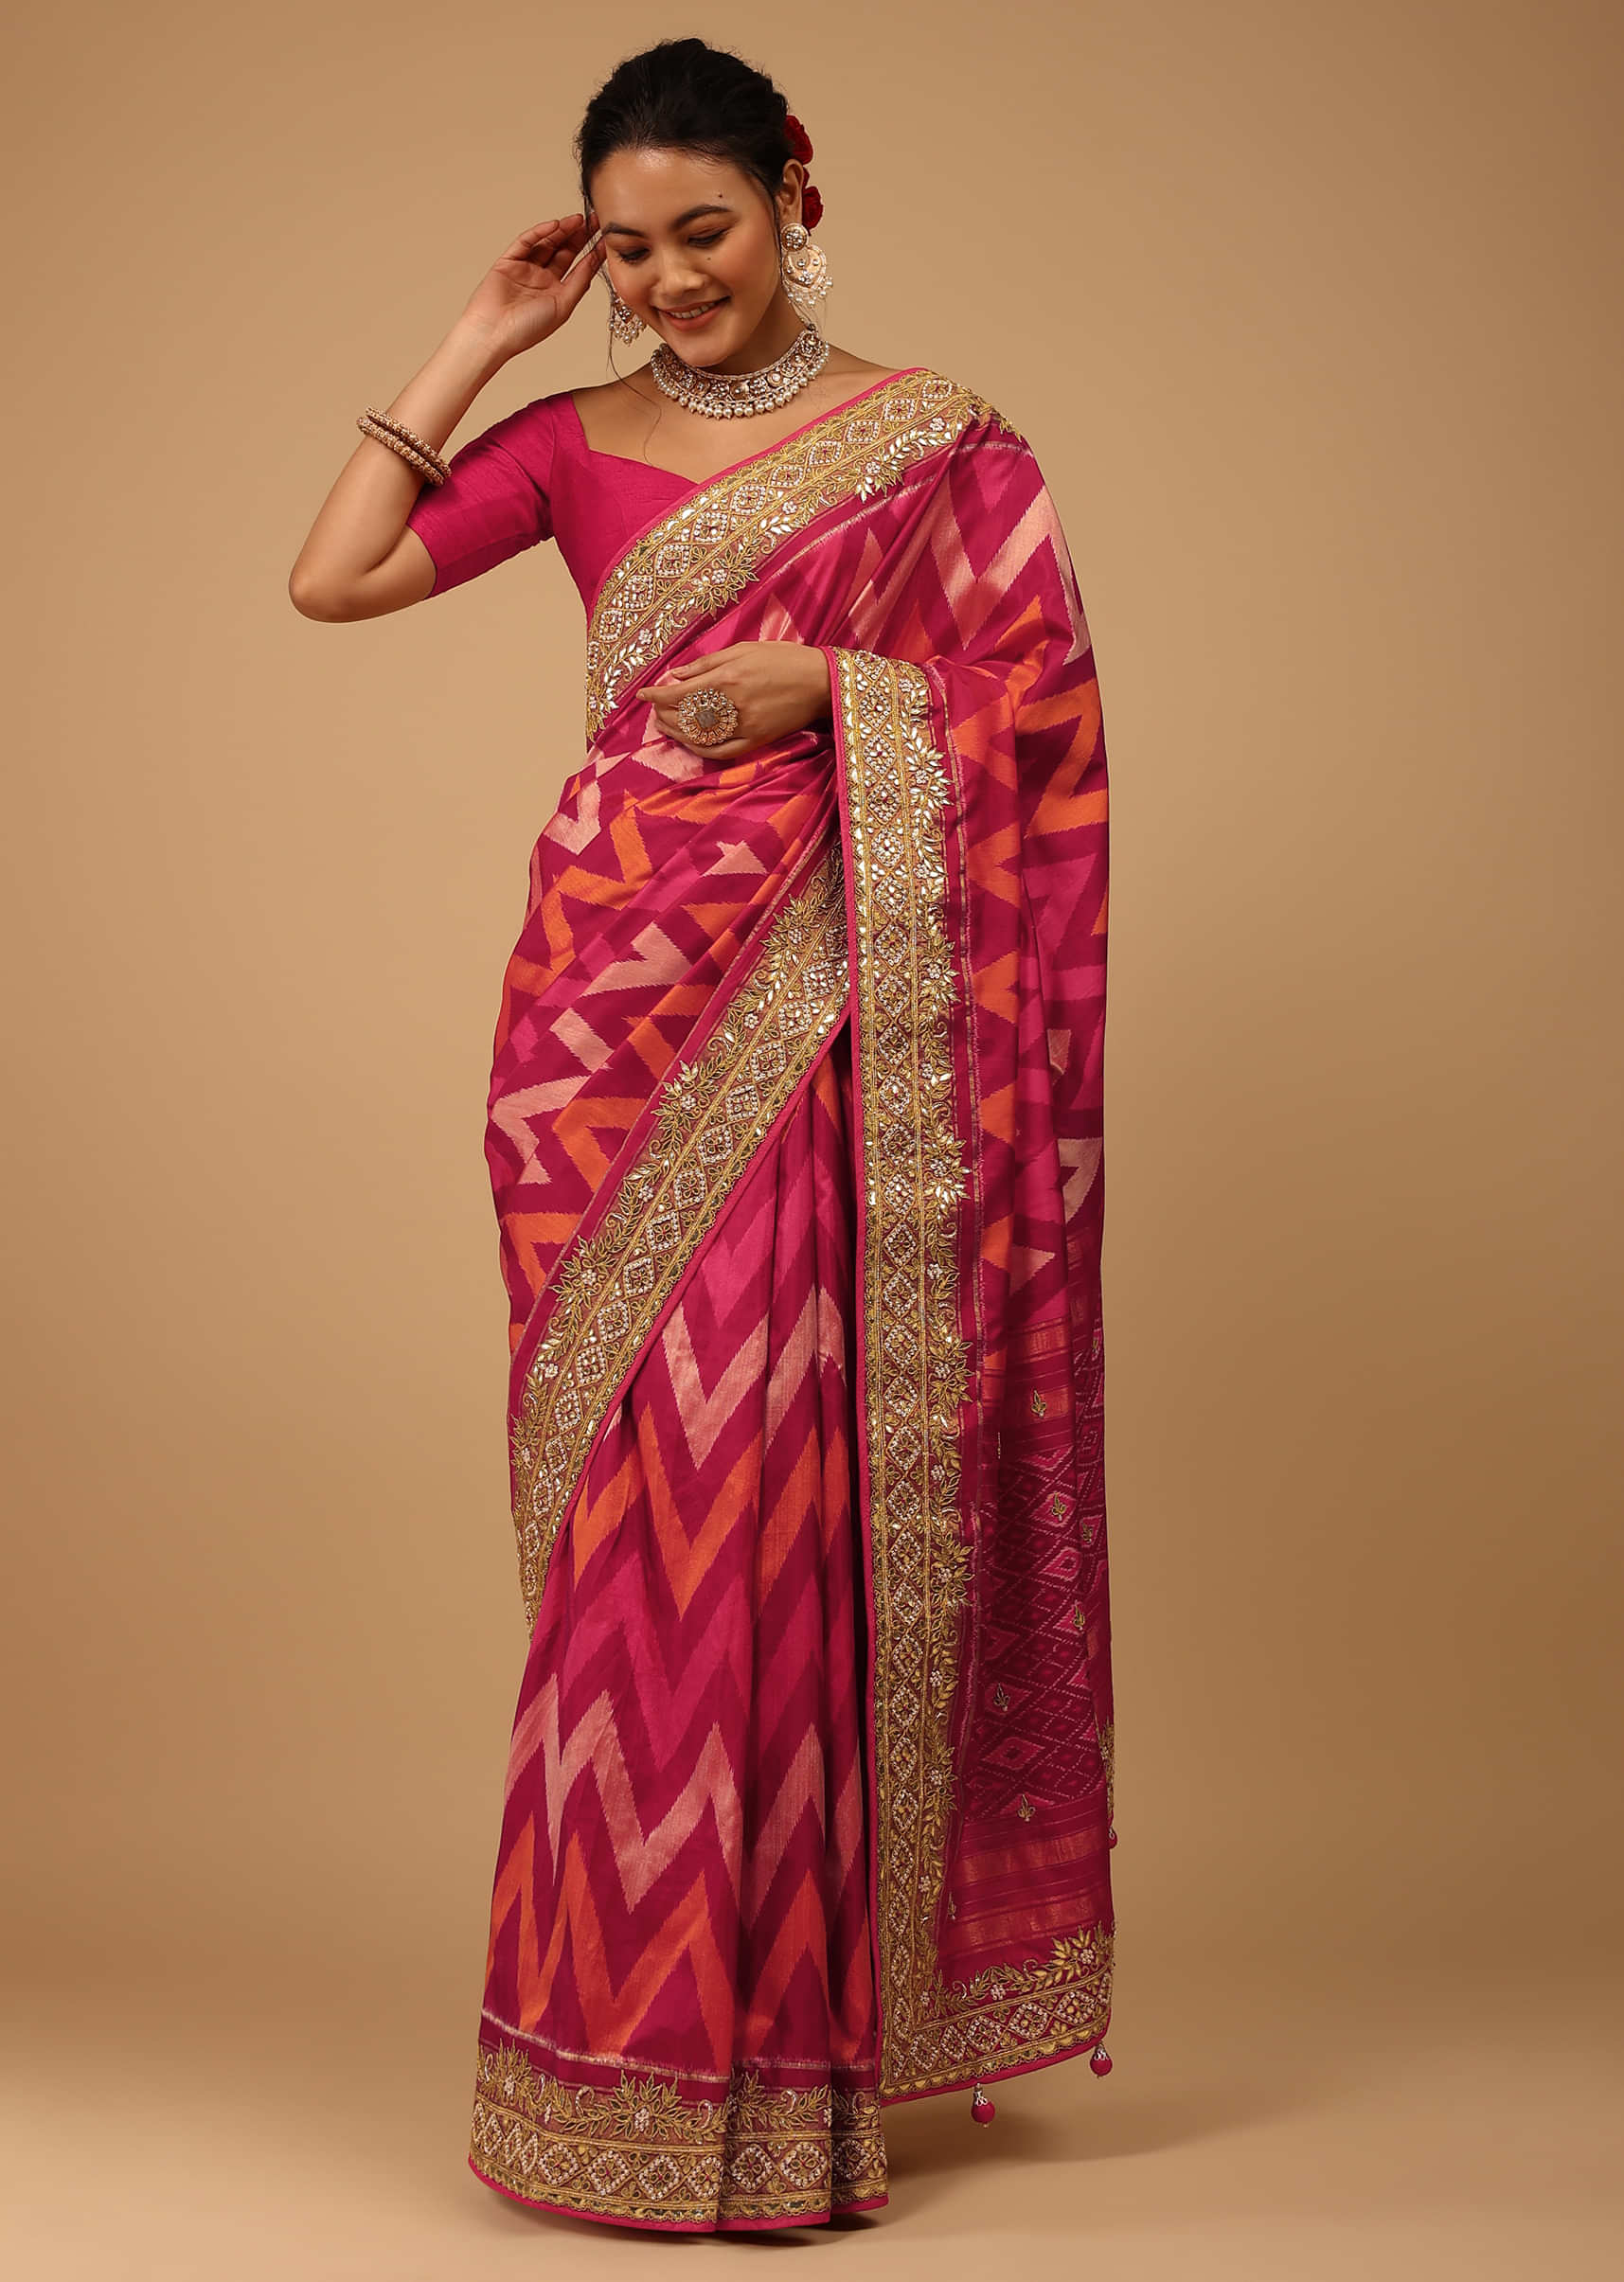 Cerise Pink Saree In Pure Silk With Handloom Patola Ikat Weave